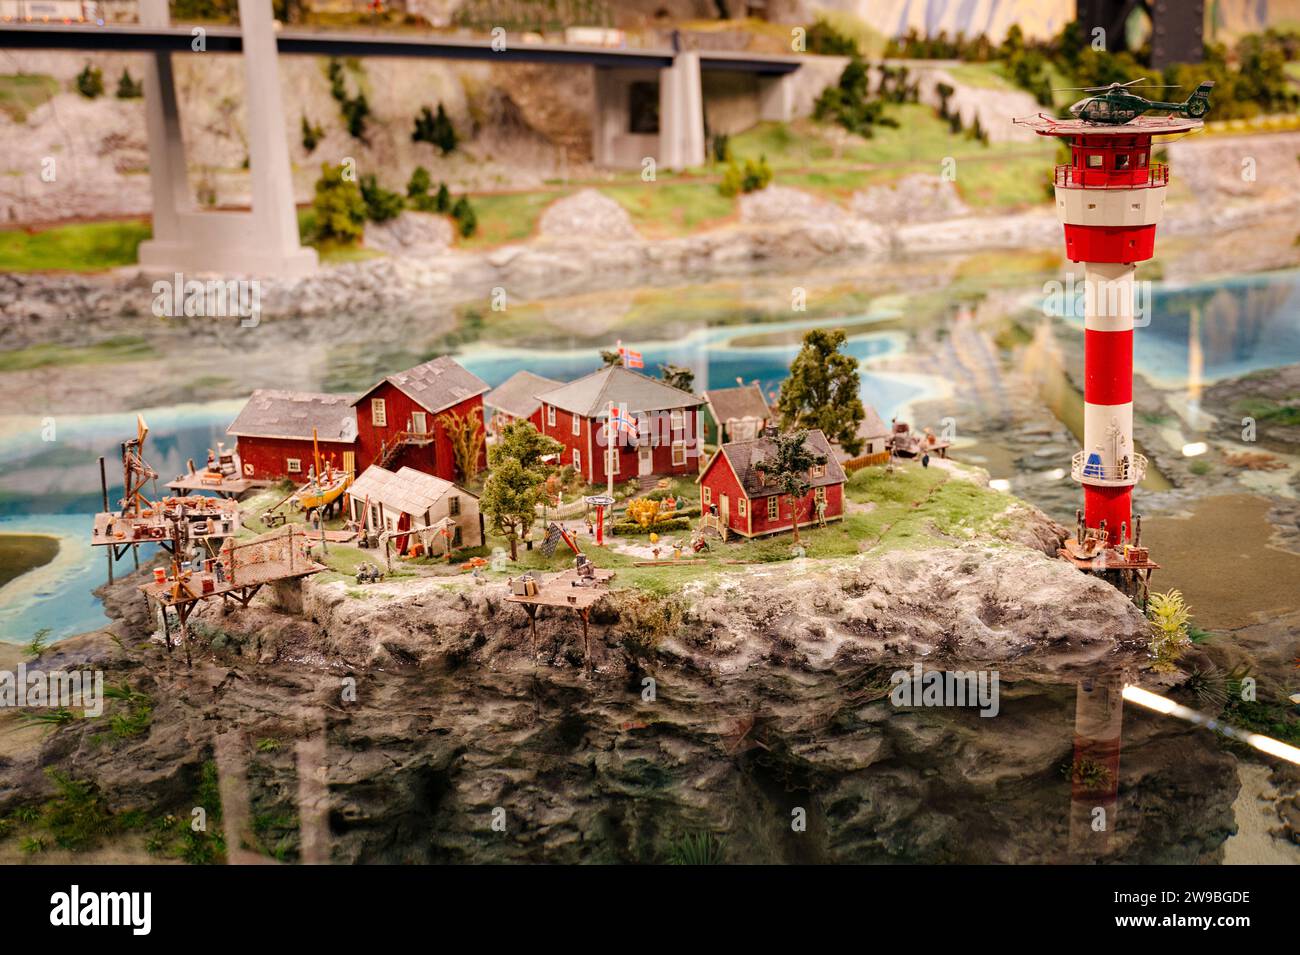 Miniatur Wunderland Hamburg in Germany, houses and landscape scandinavia, museum with miniature model construction of the world Stock Photo